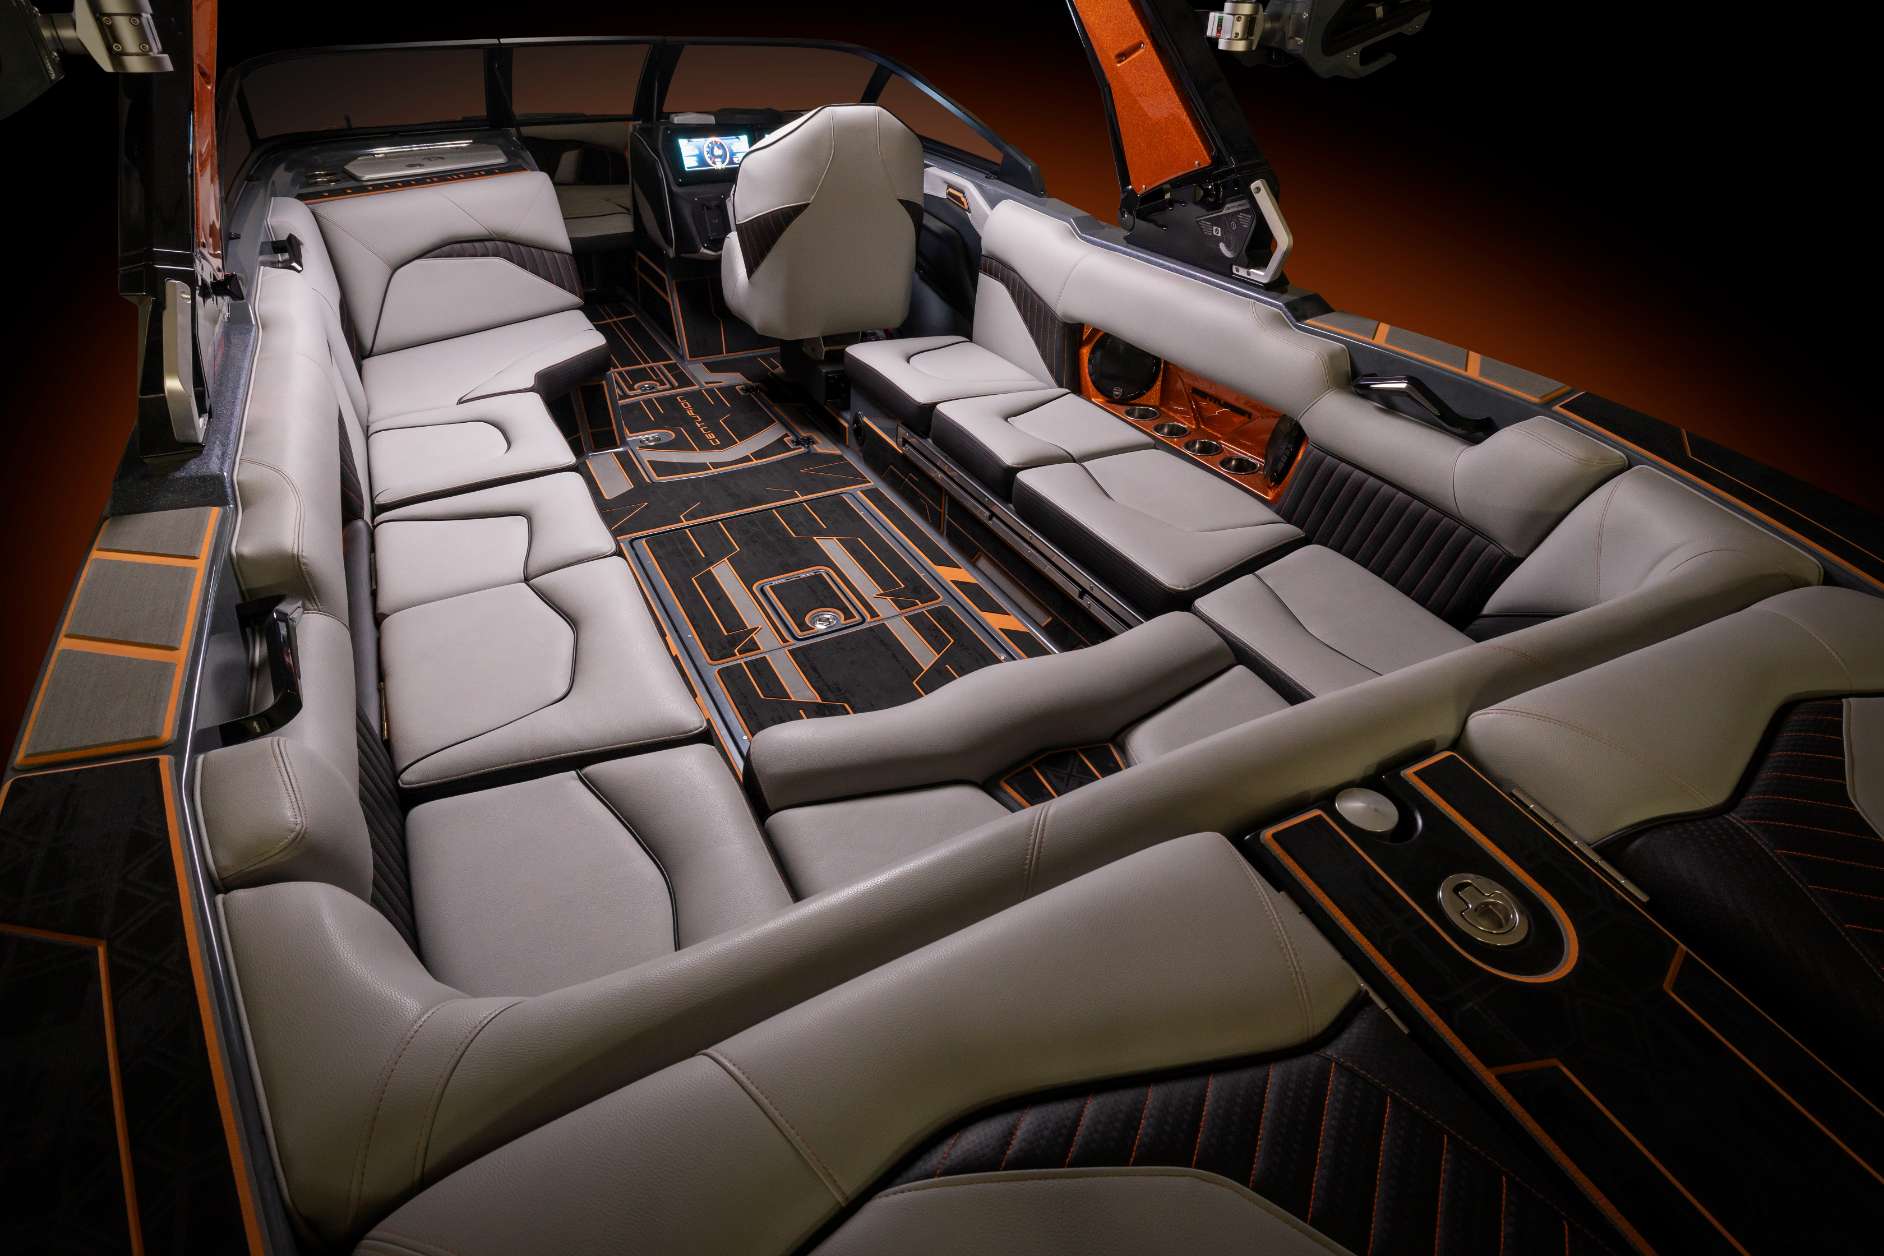 The interior of a wakesurf boat with black and orange seats.